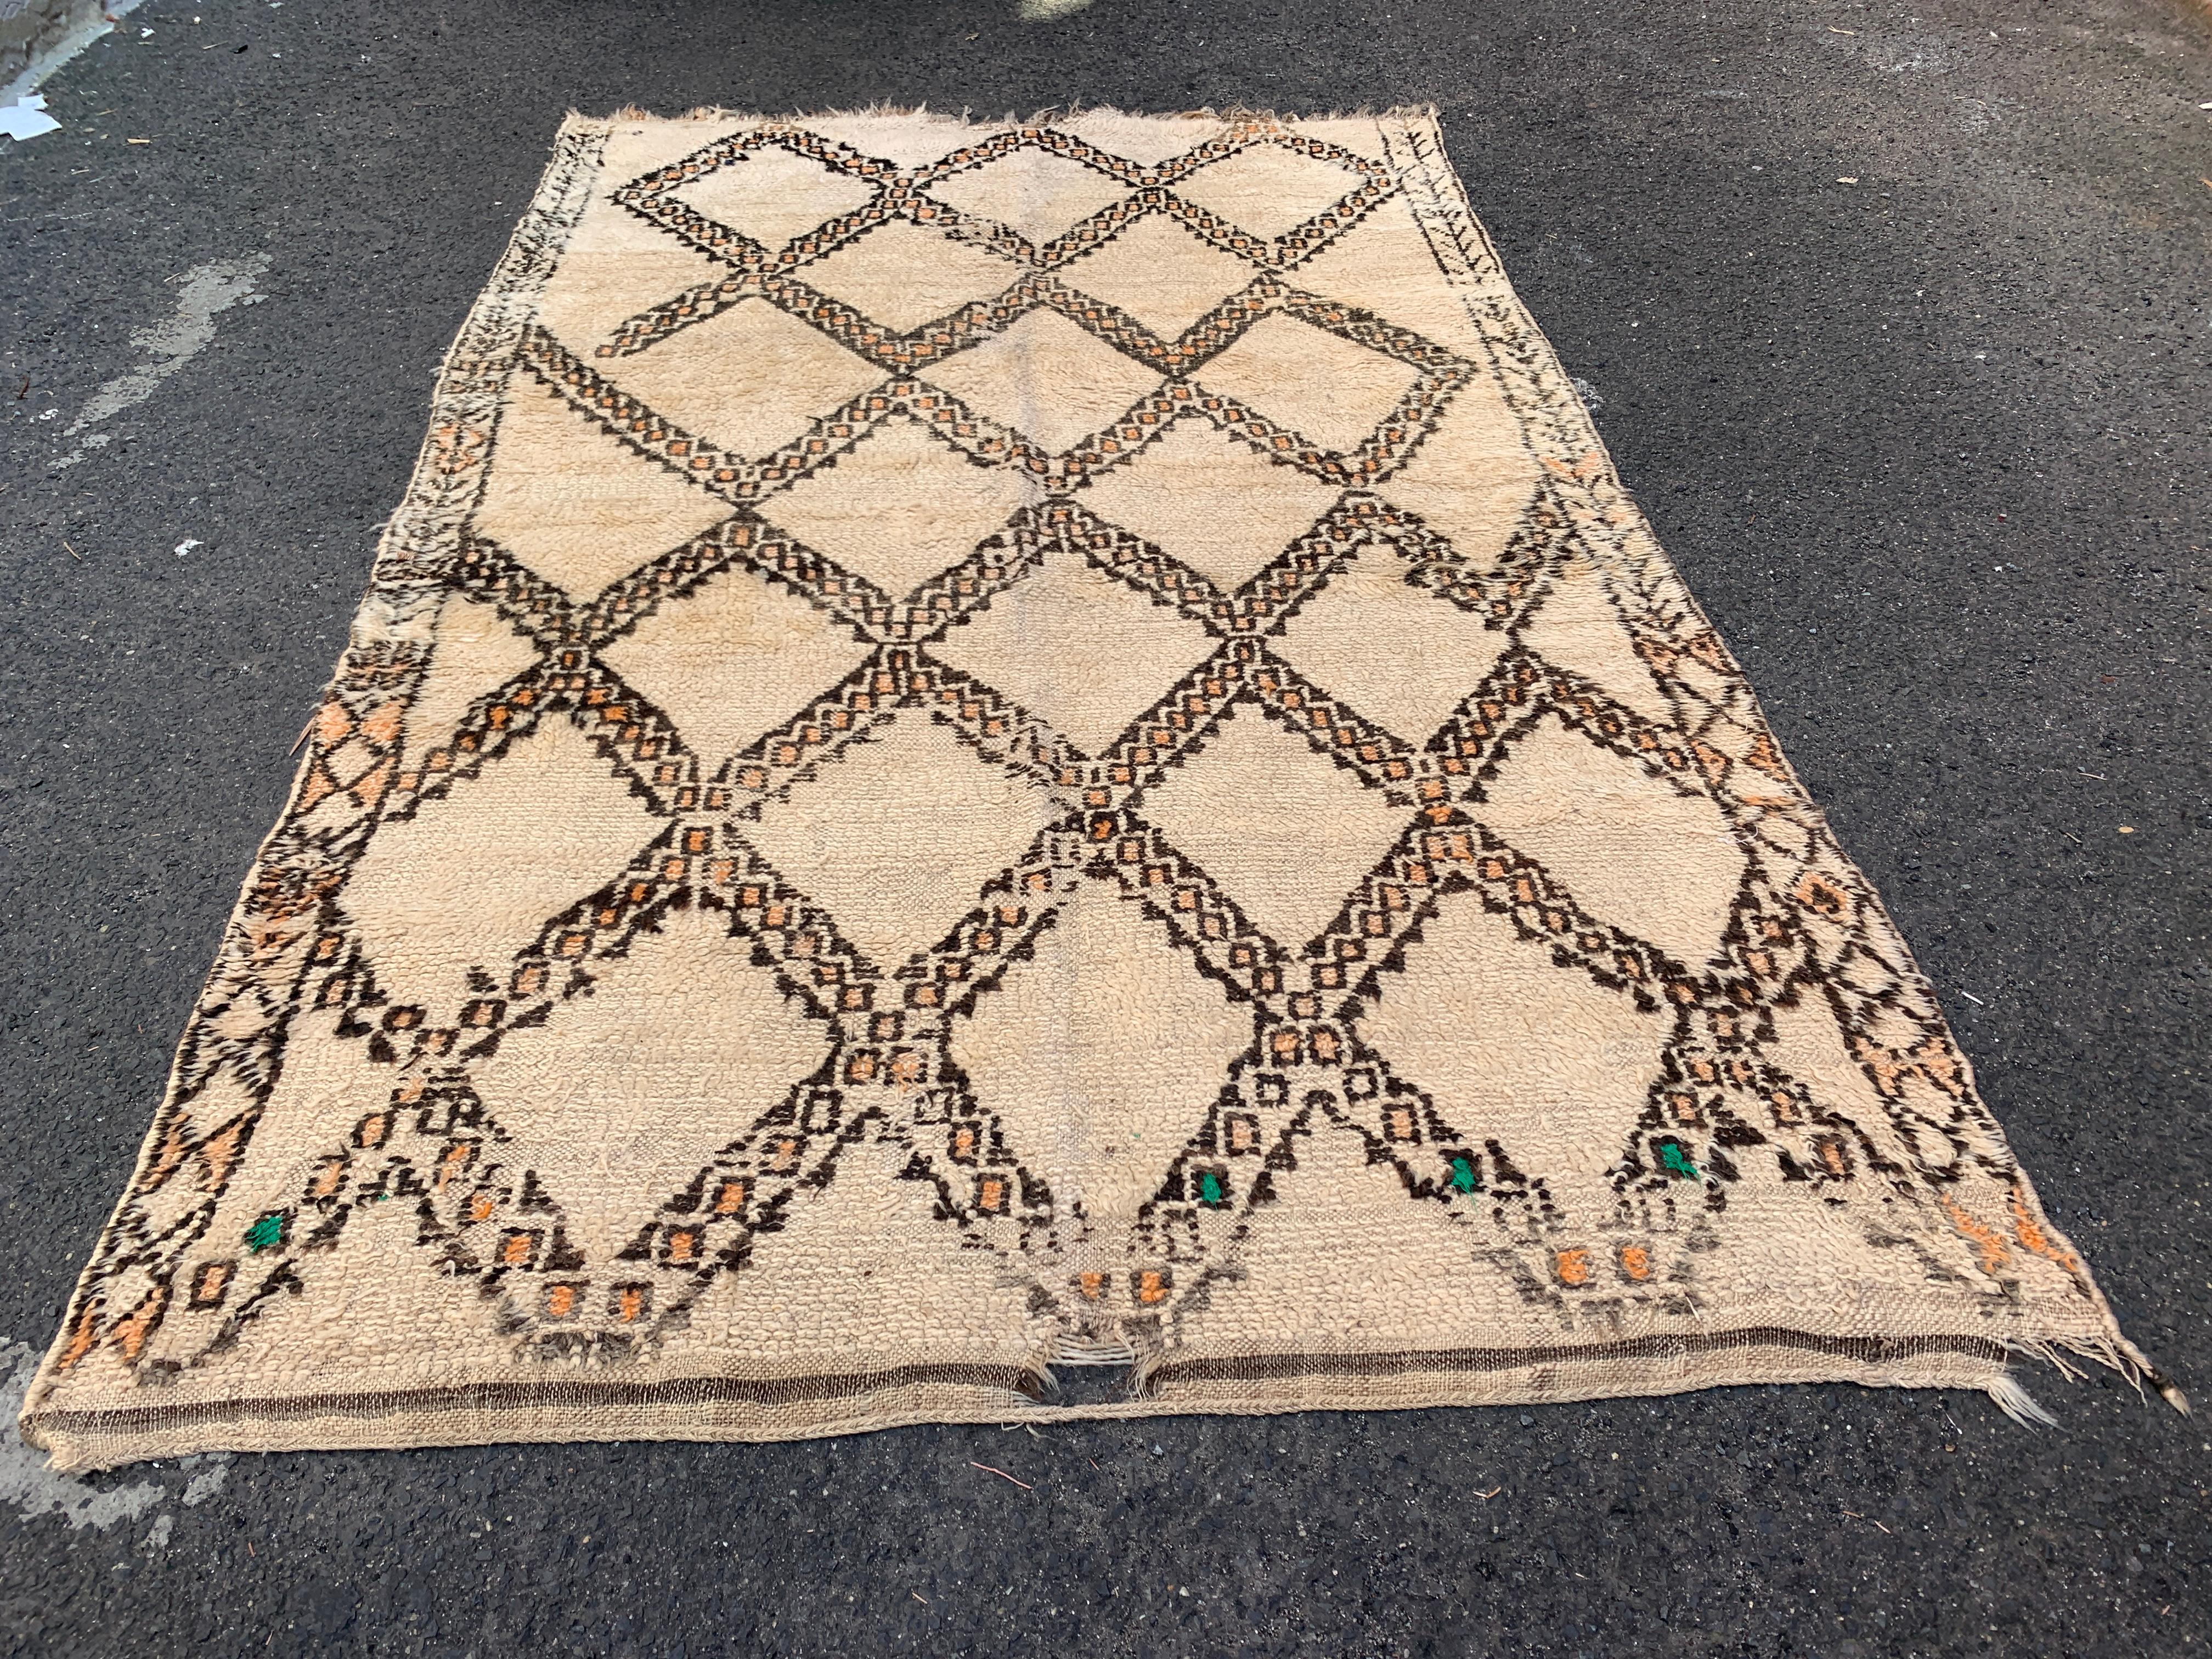 This welcoming vintage beni ourain rug from Morocco has a warm cream color with a beautiful subtle diamond pattern. The perfect handwoven wool texture to give any Bohemian home a cozy atmosphere.